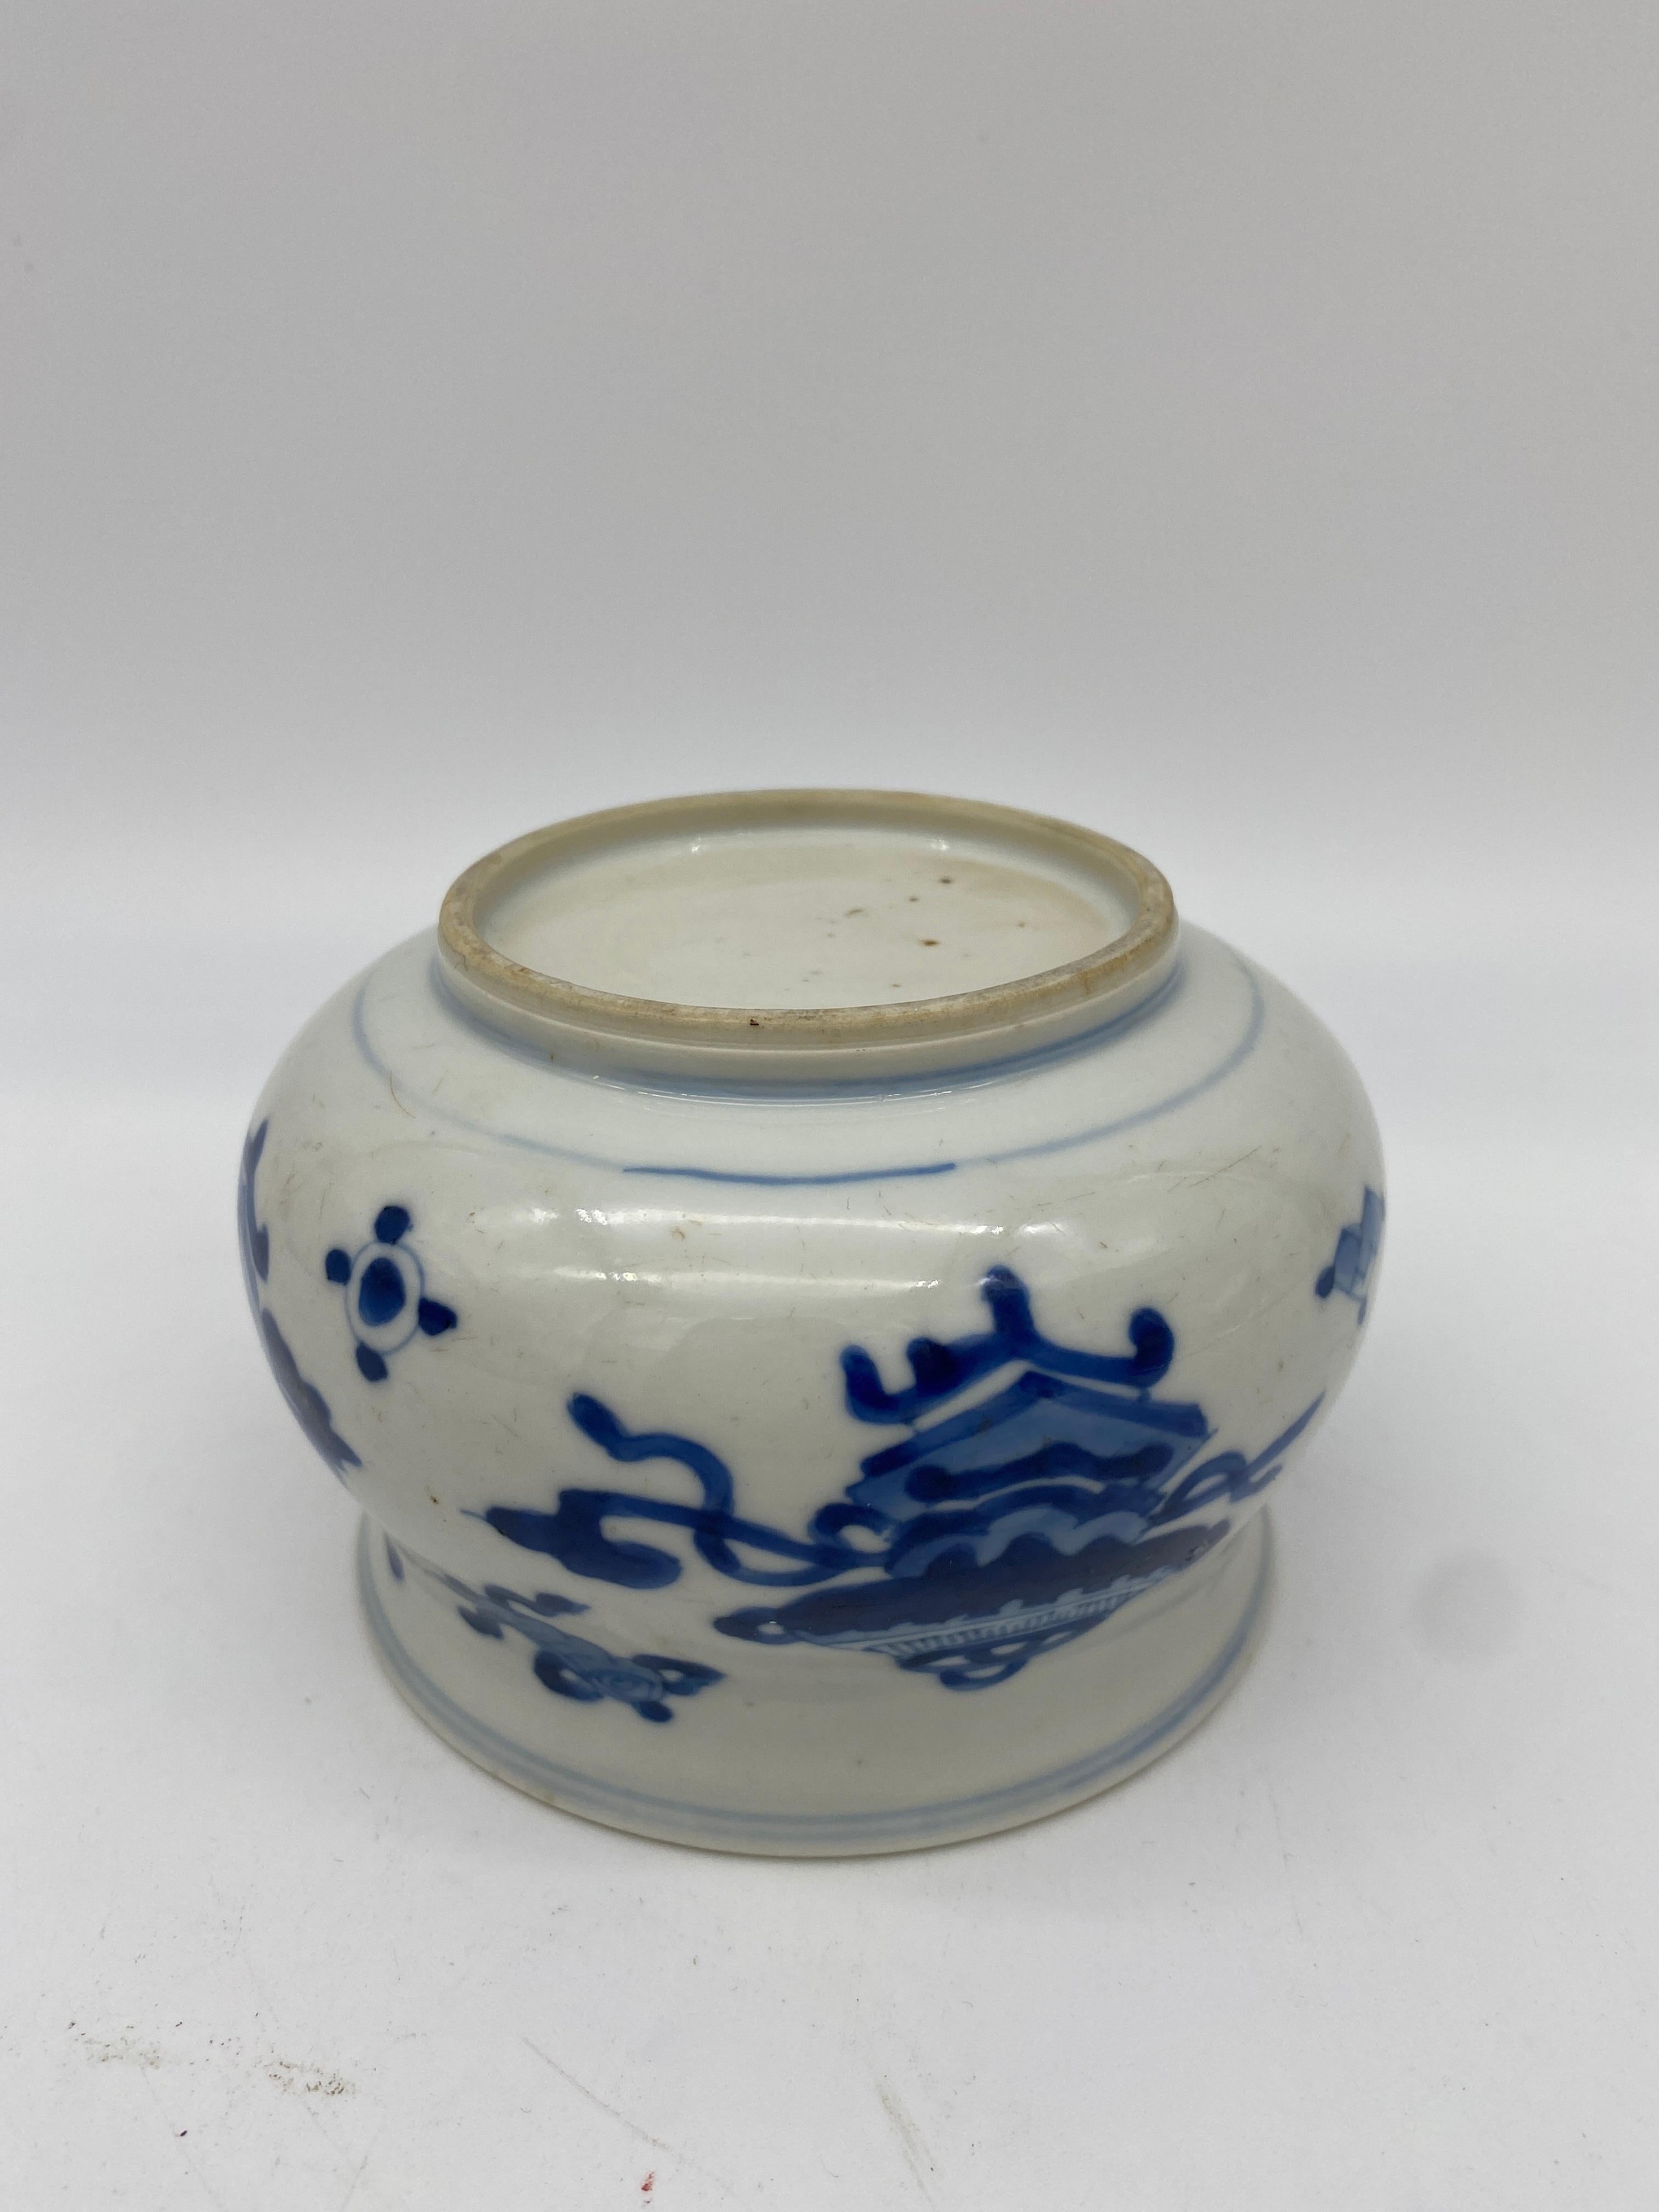 Antique Qing Dynasty Blue and White Chinese Porcelain Censer In Good Condition For Sale In Brea, CA